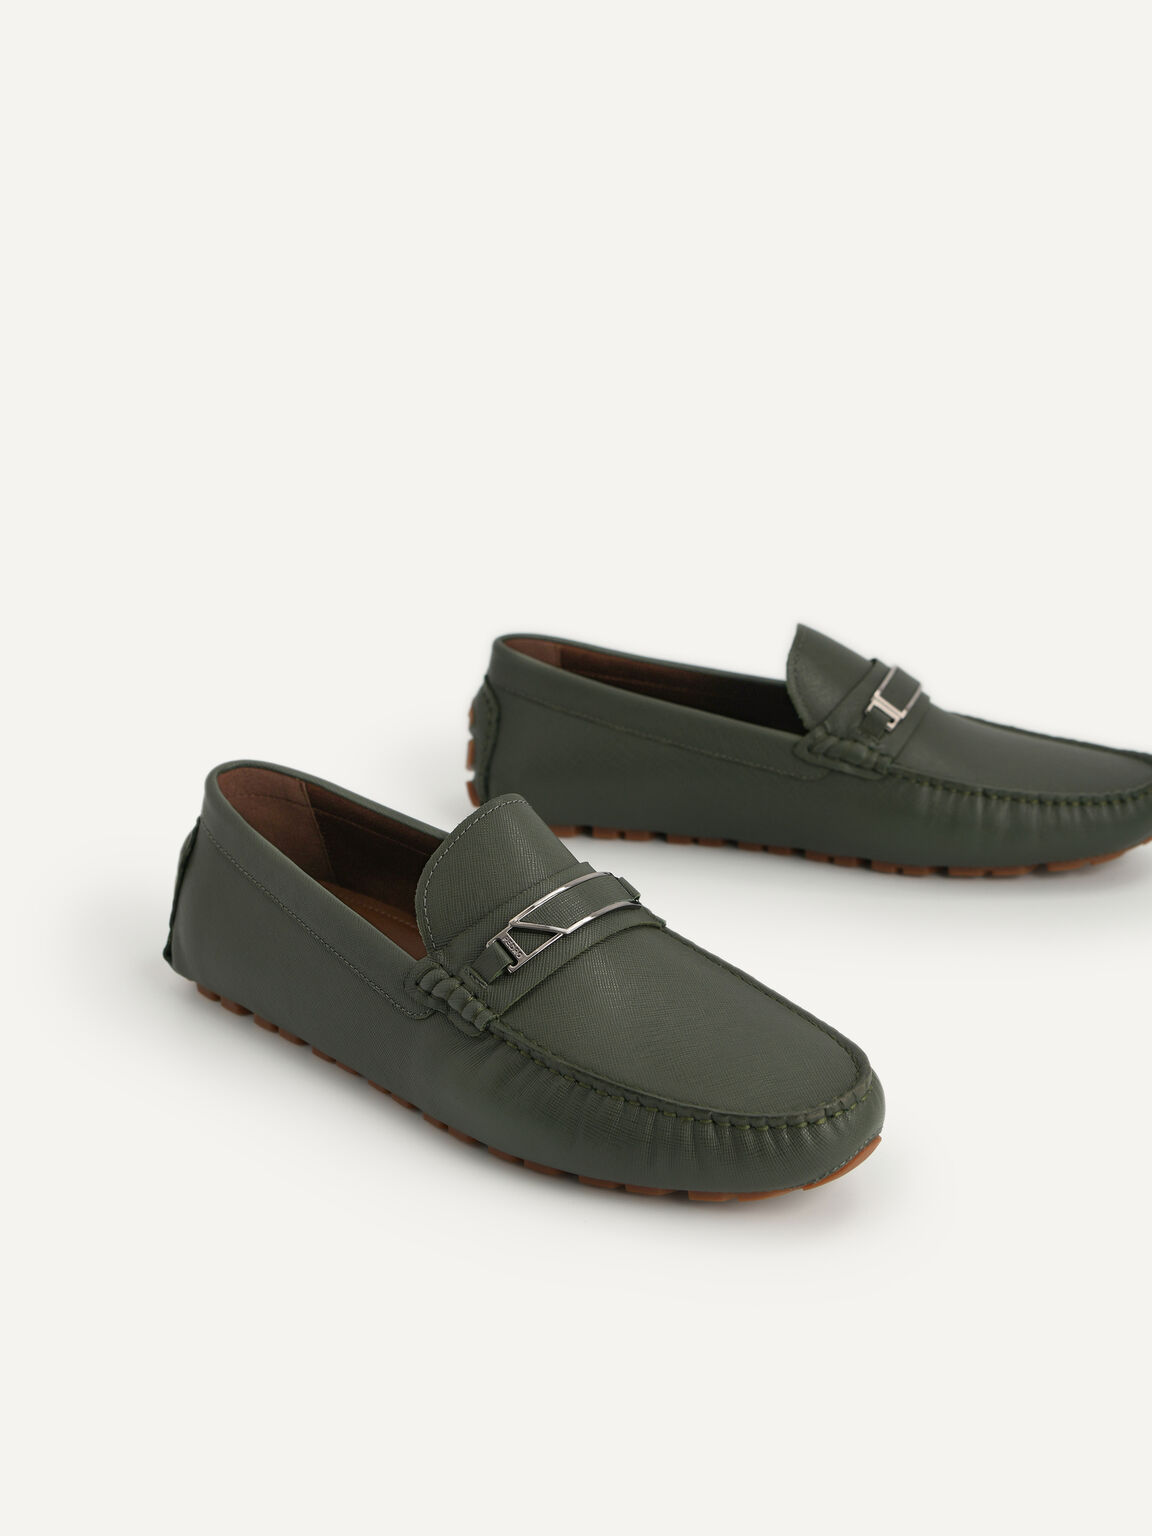 Leather Moccasins with Metal Bit, Dark Green